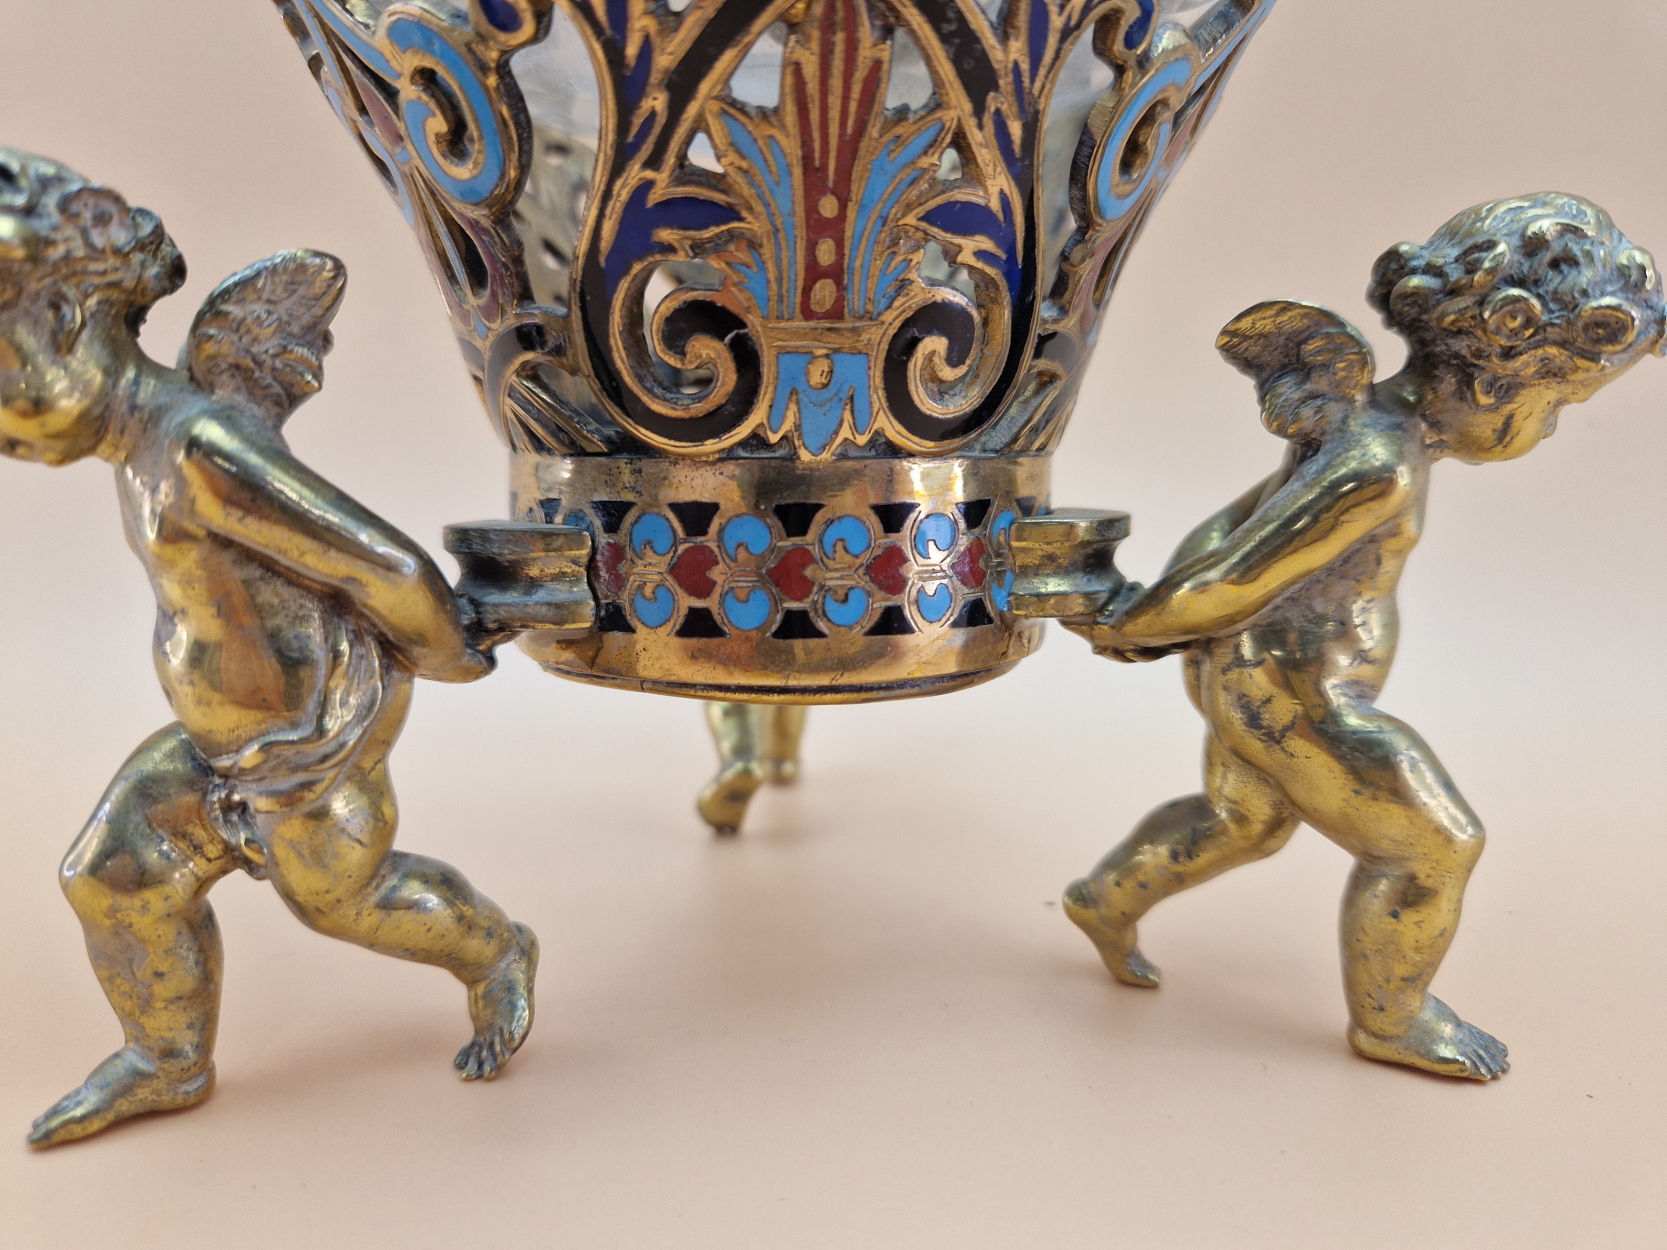 A LATE 19th C. FRENCH CLEAR CUT GLASS AND CHAMPLEVE ENAMEL OIL LAMP SUPPORTED BY THREE BRASS CUPIDS - Image 9 of 10